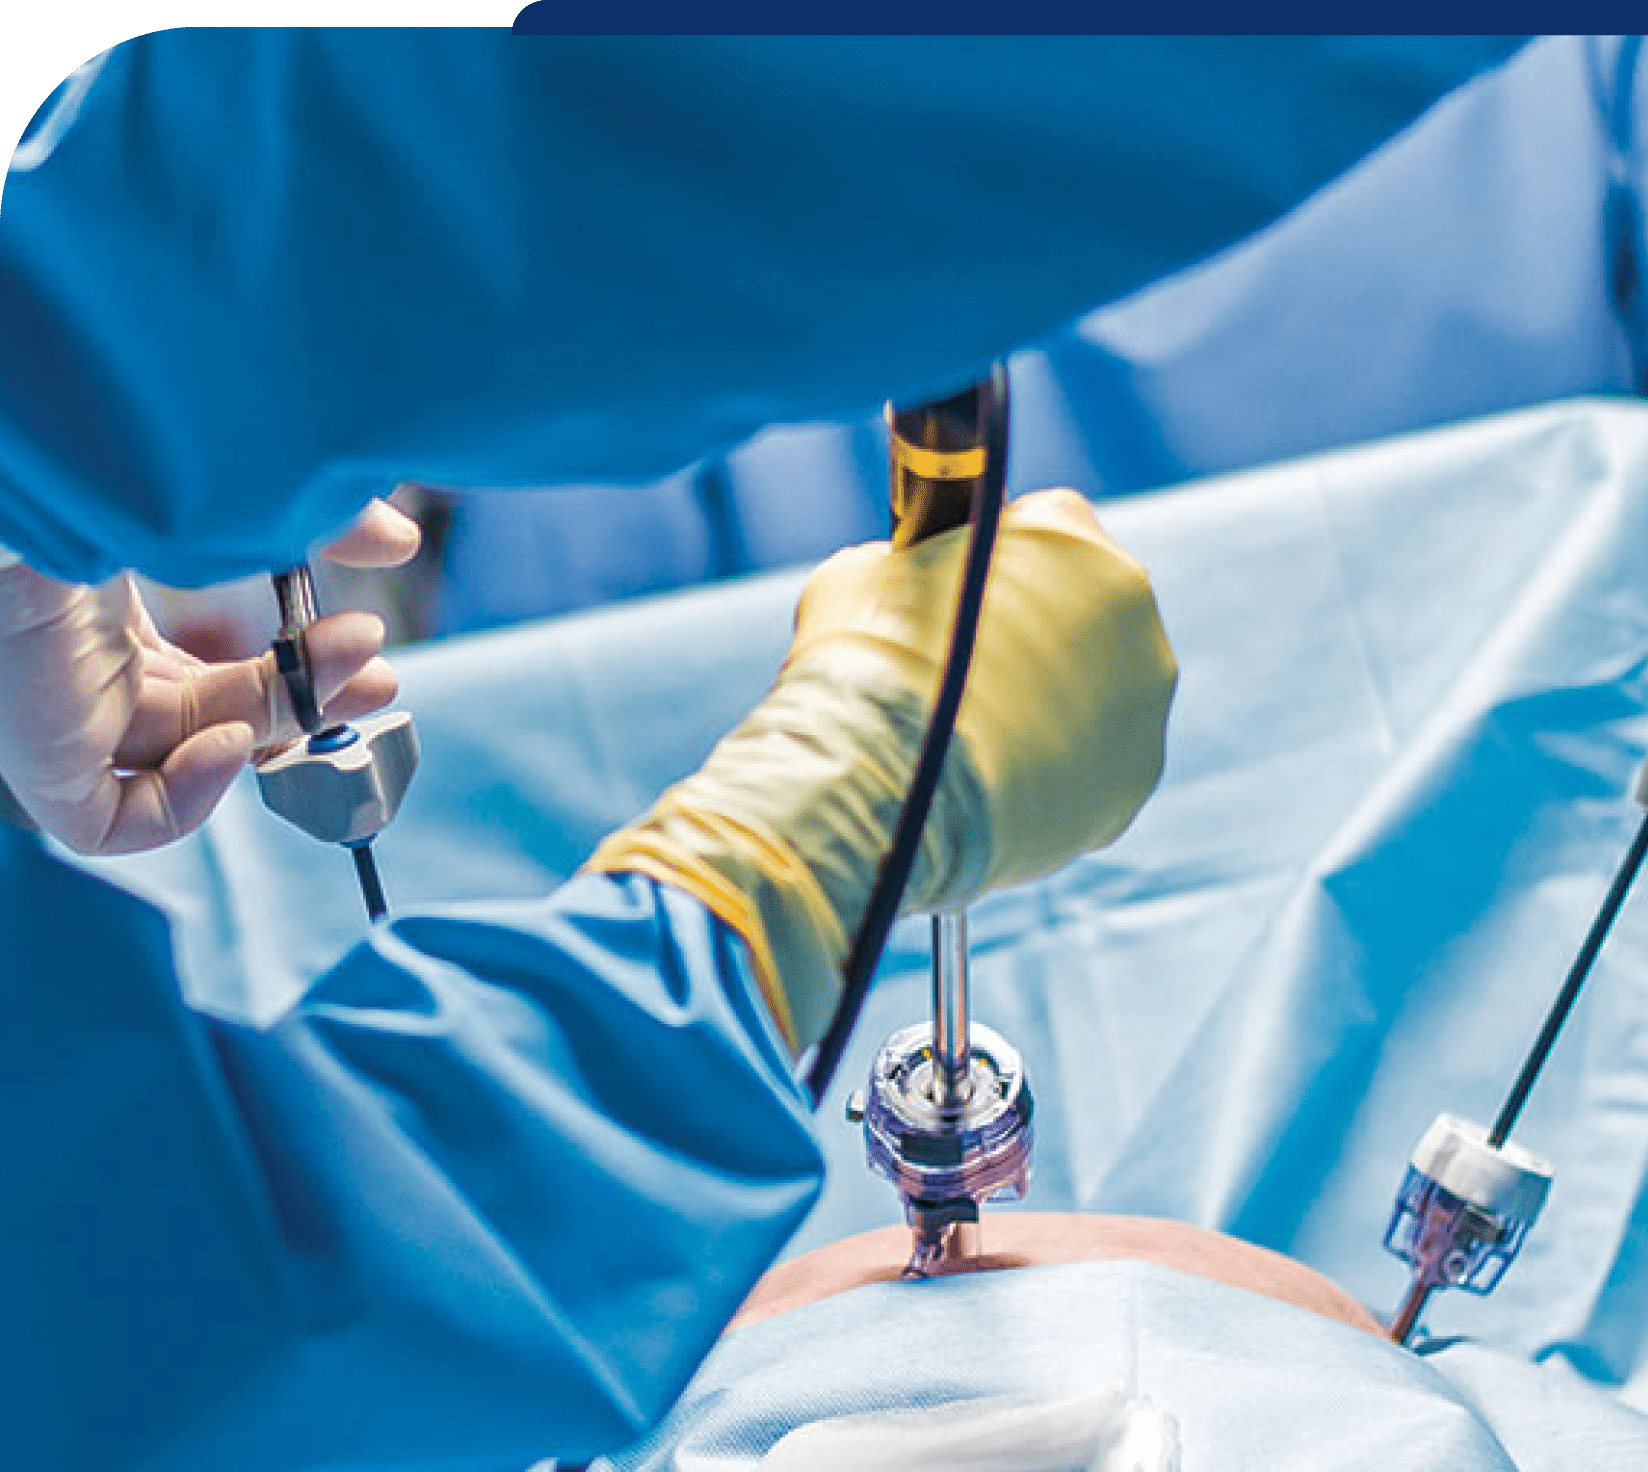 Handling technology during surgery.